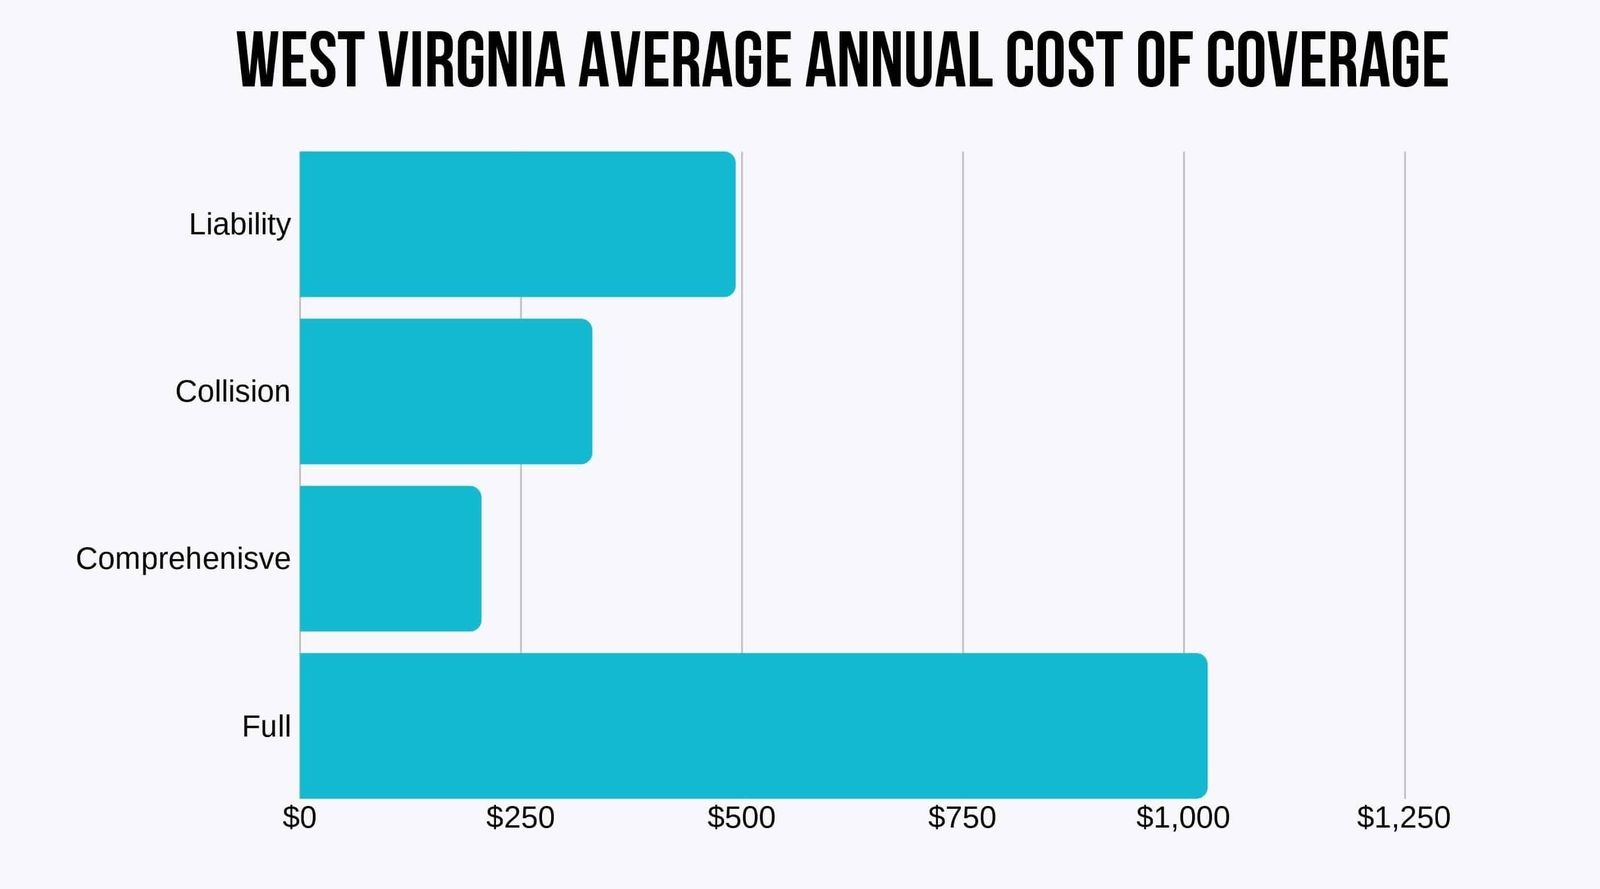 Bar graph of West Virginia's Average Annual Cost of Coverage